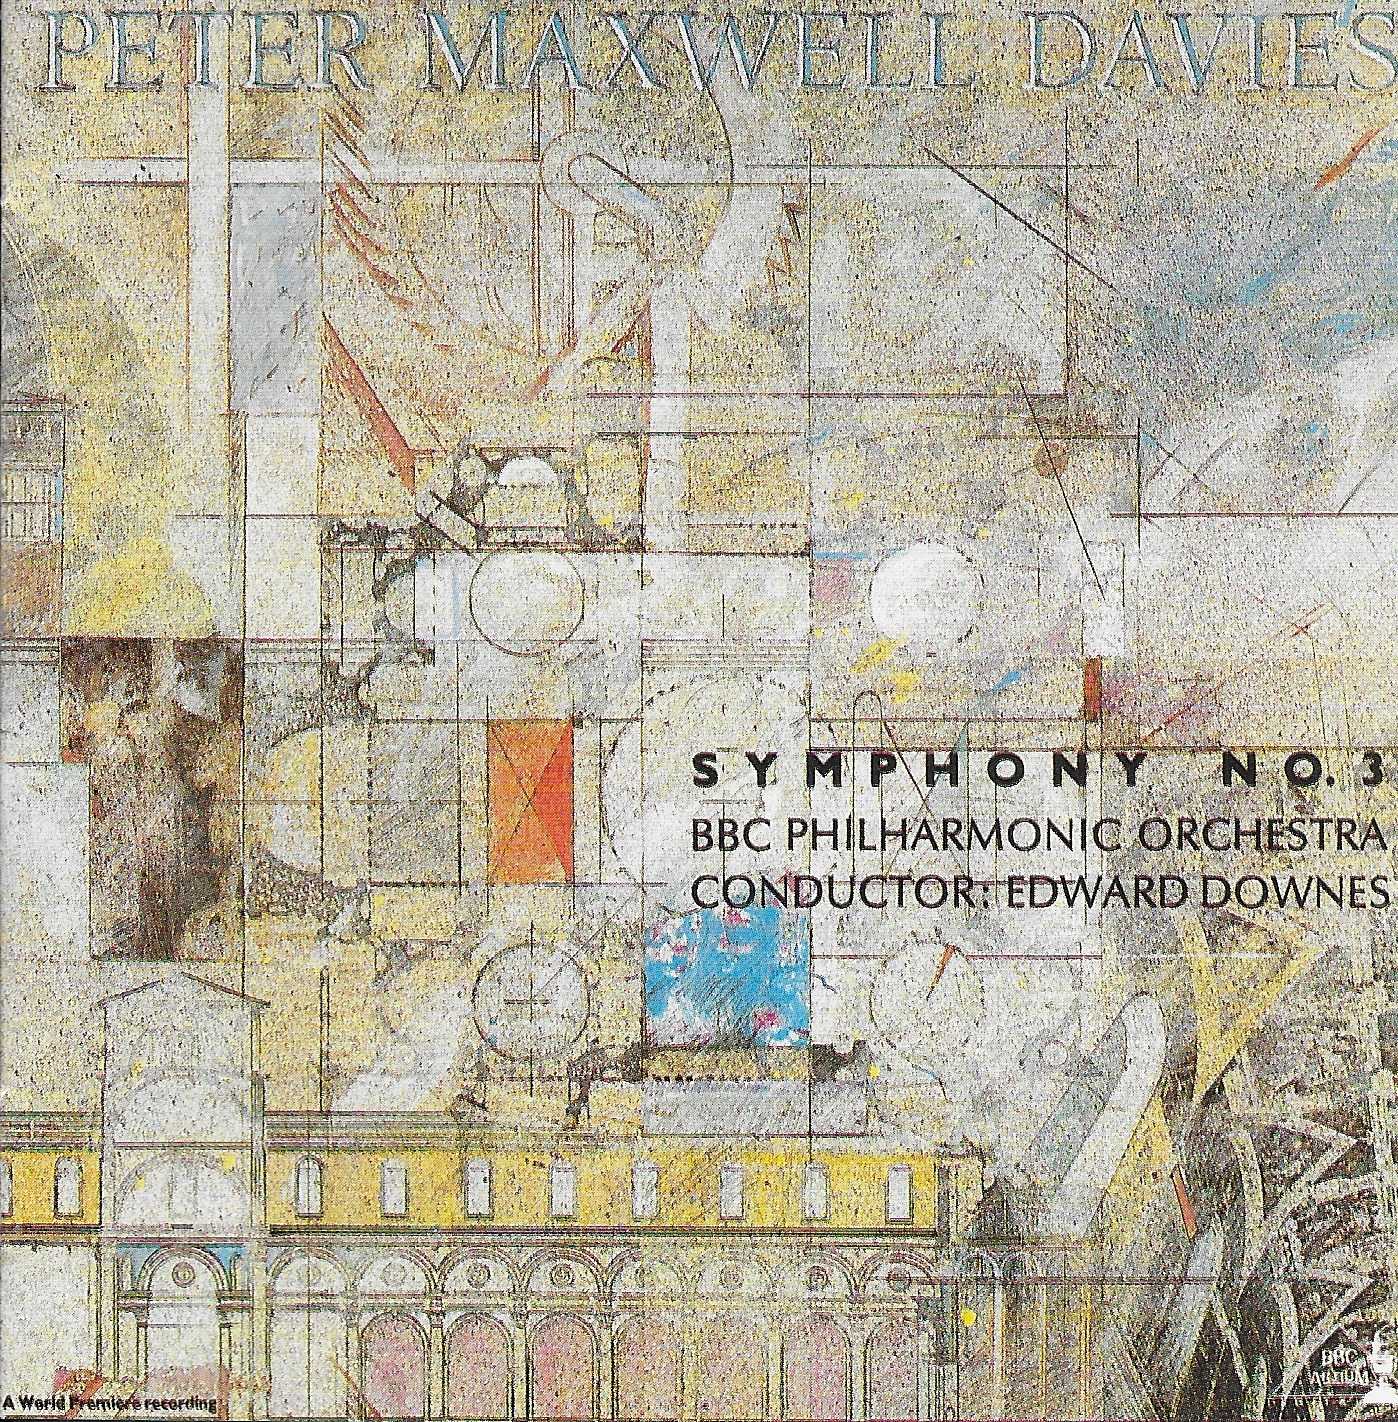 Picture of Peter Maxwell Davies - Symphony no. 3 by artist Peter Maxwell Davies from the BBC cds - Records and Tapes library